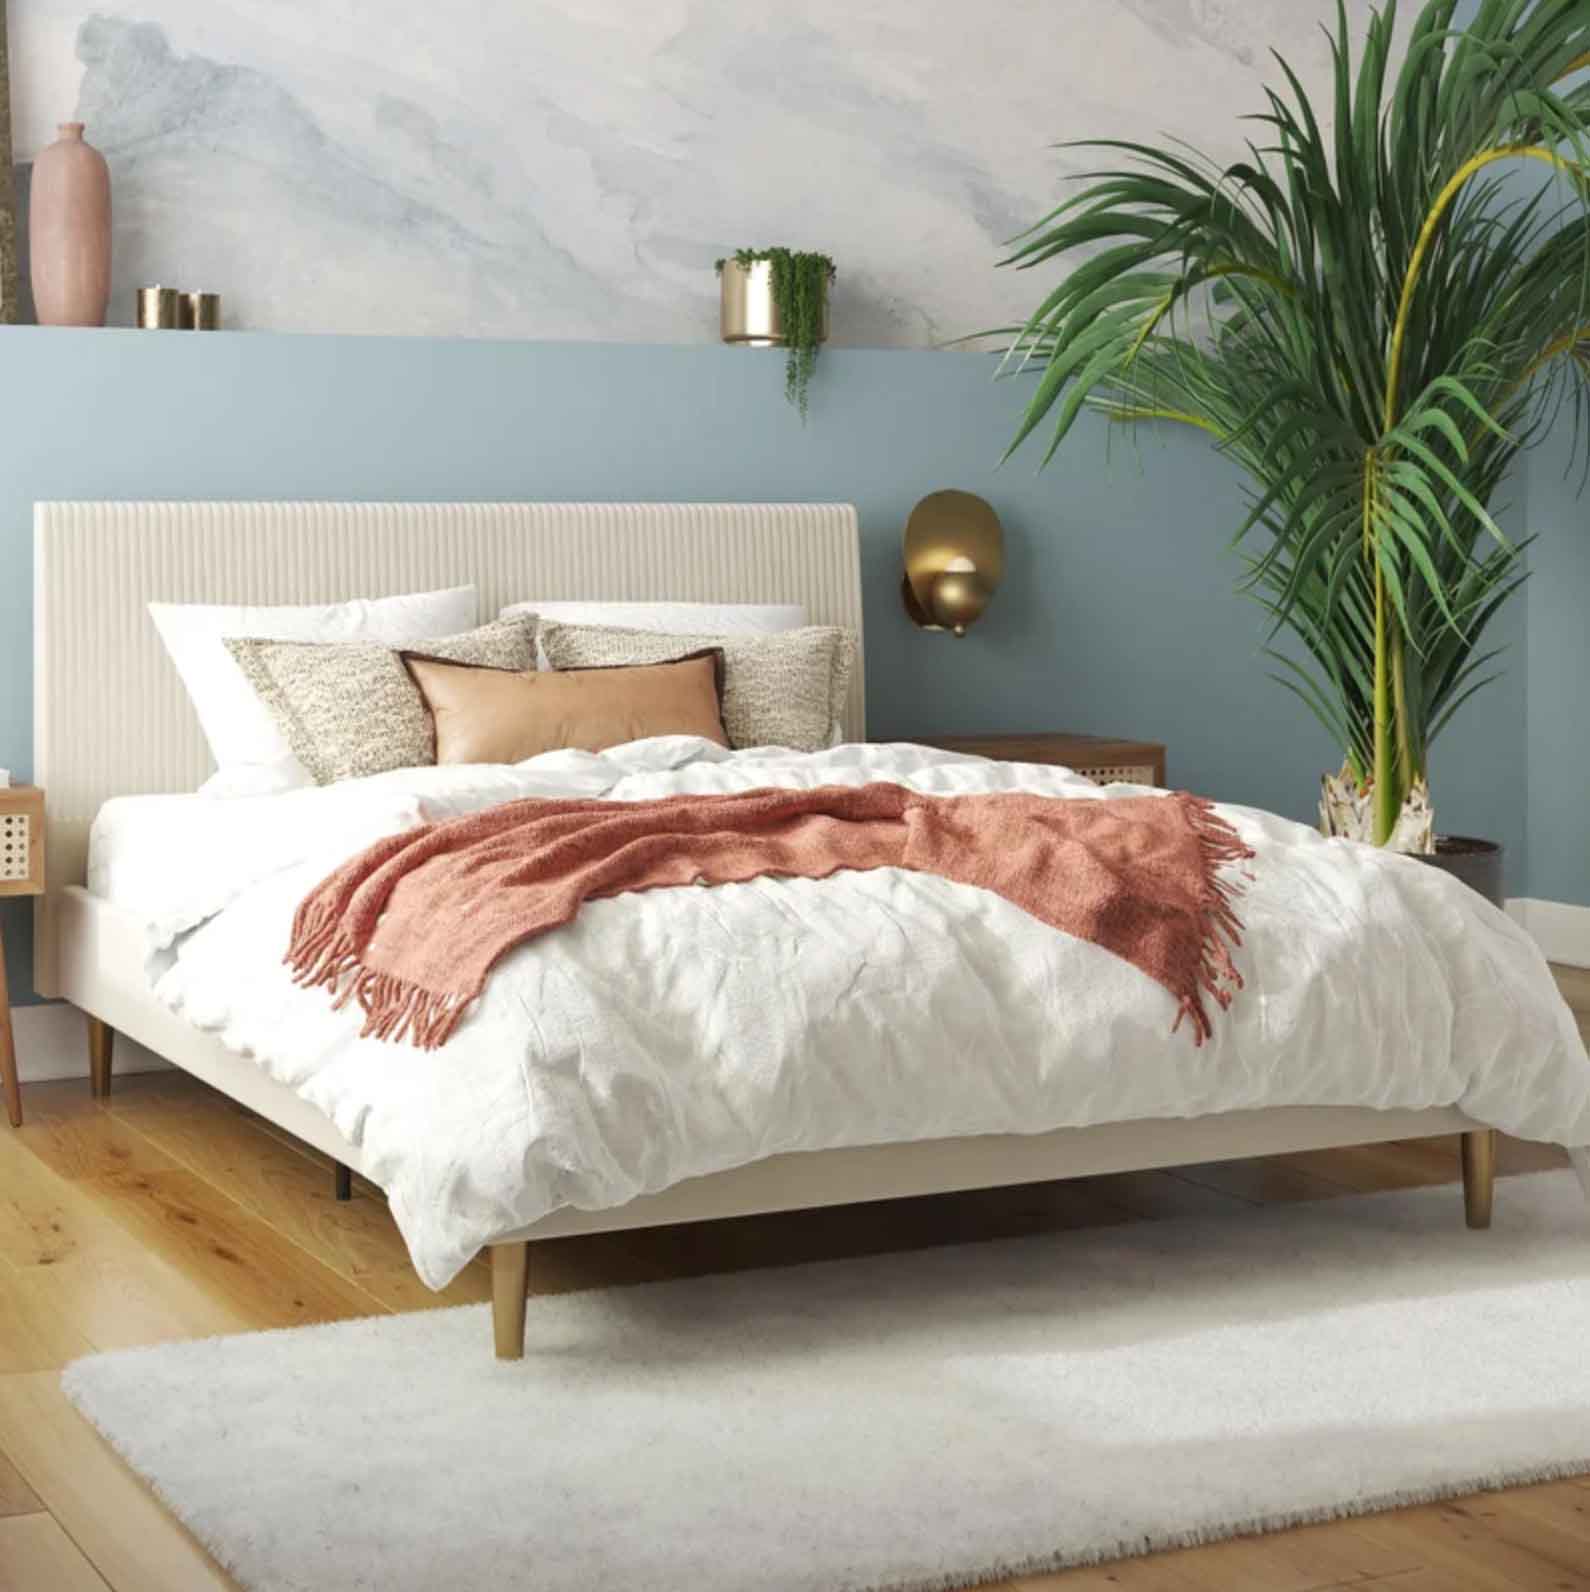 Cream-colored upholstered bedframe in bedroom setting